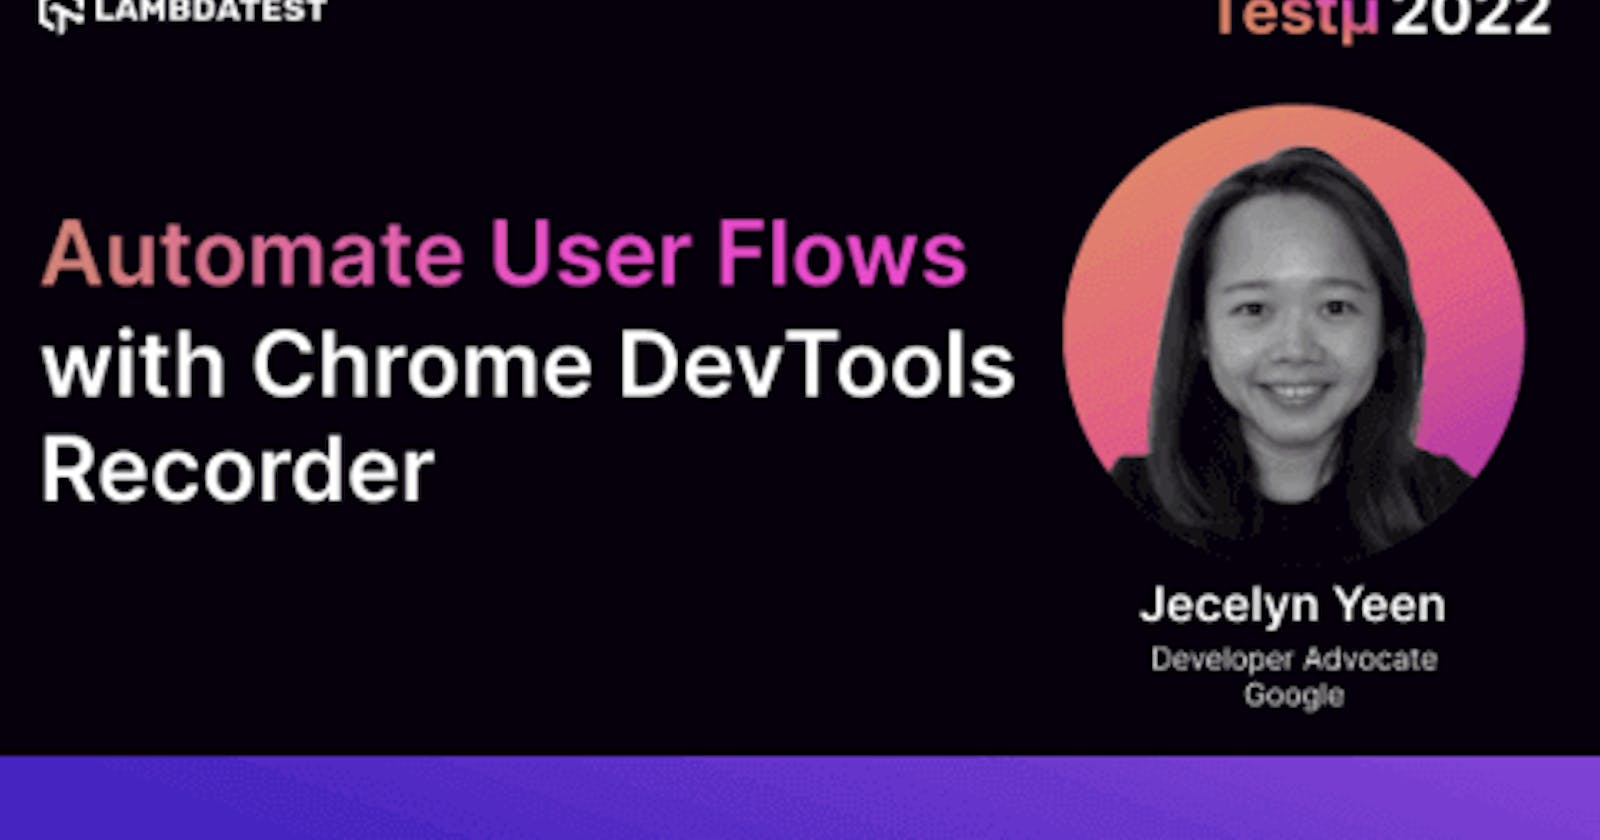 Automate User Flows with Chrome DevTools Recorder: Jecelyn Yeen [Testμ 2022]